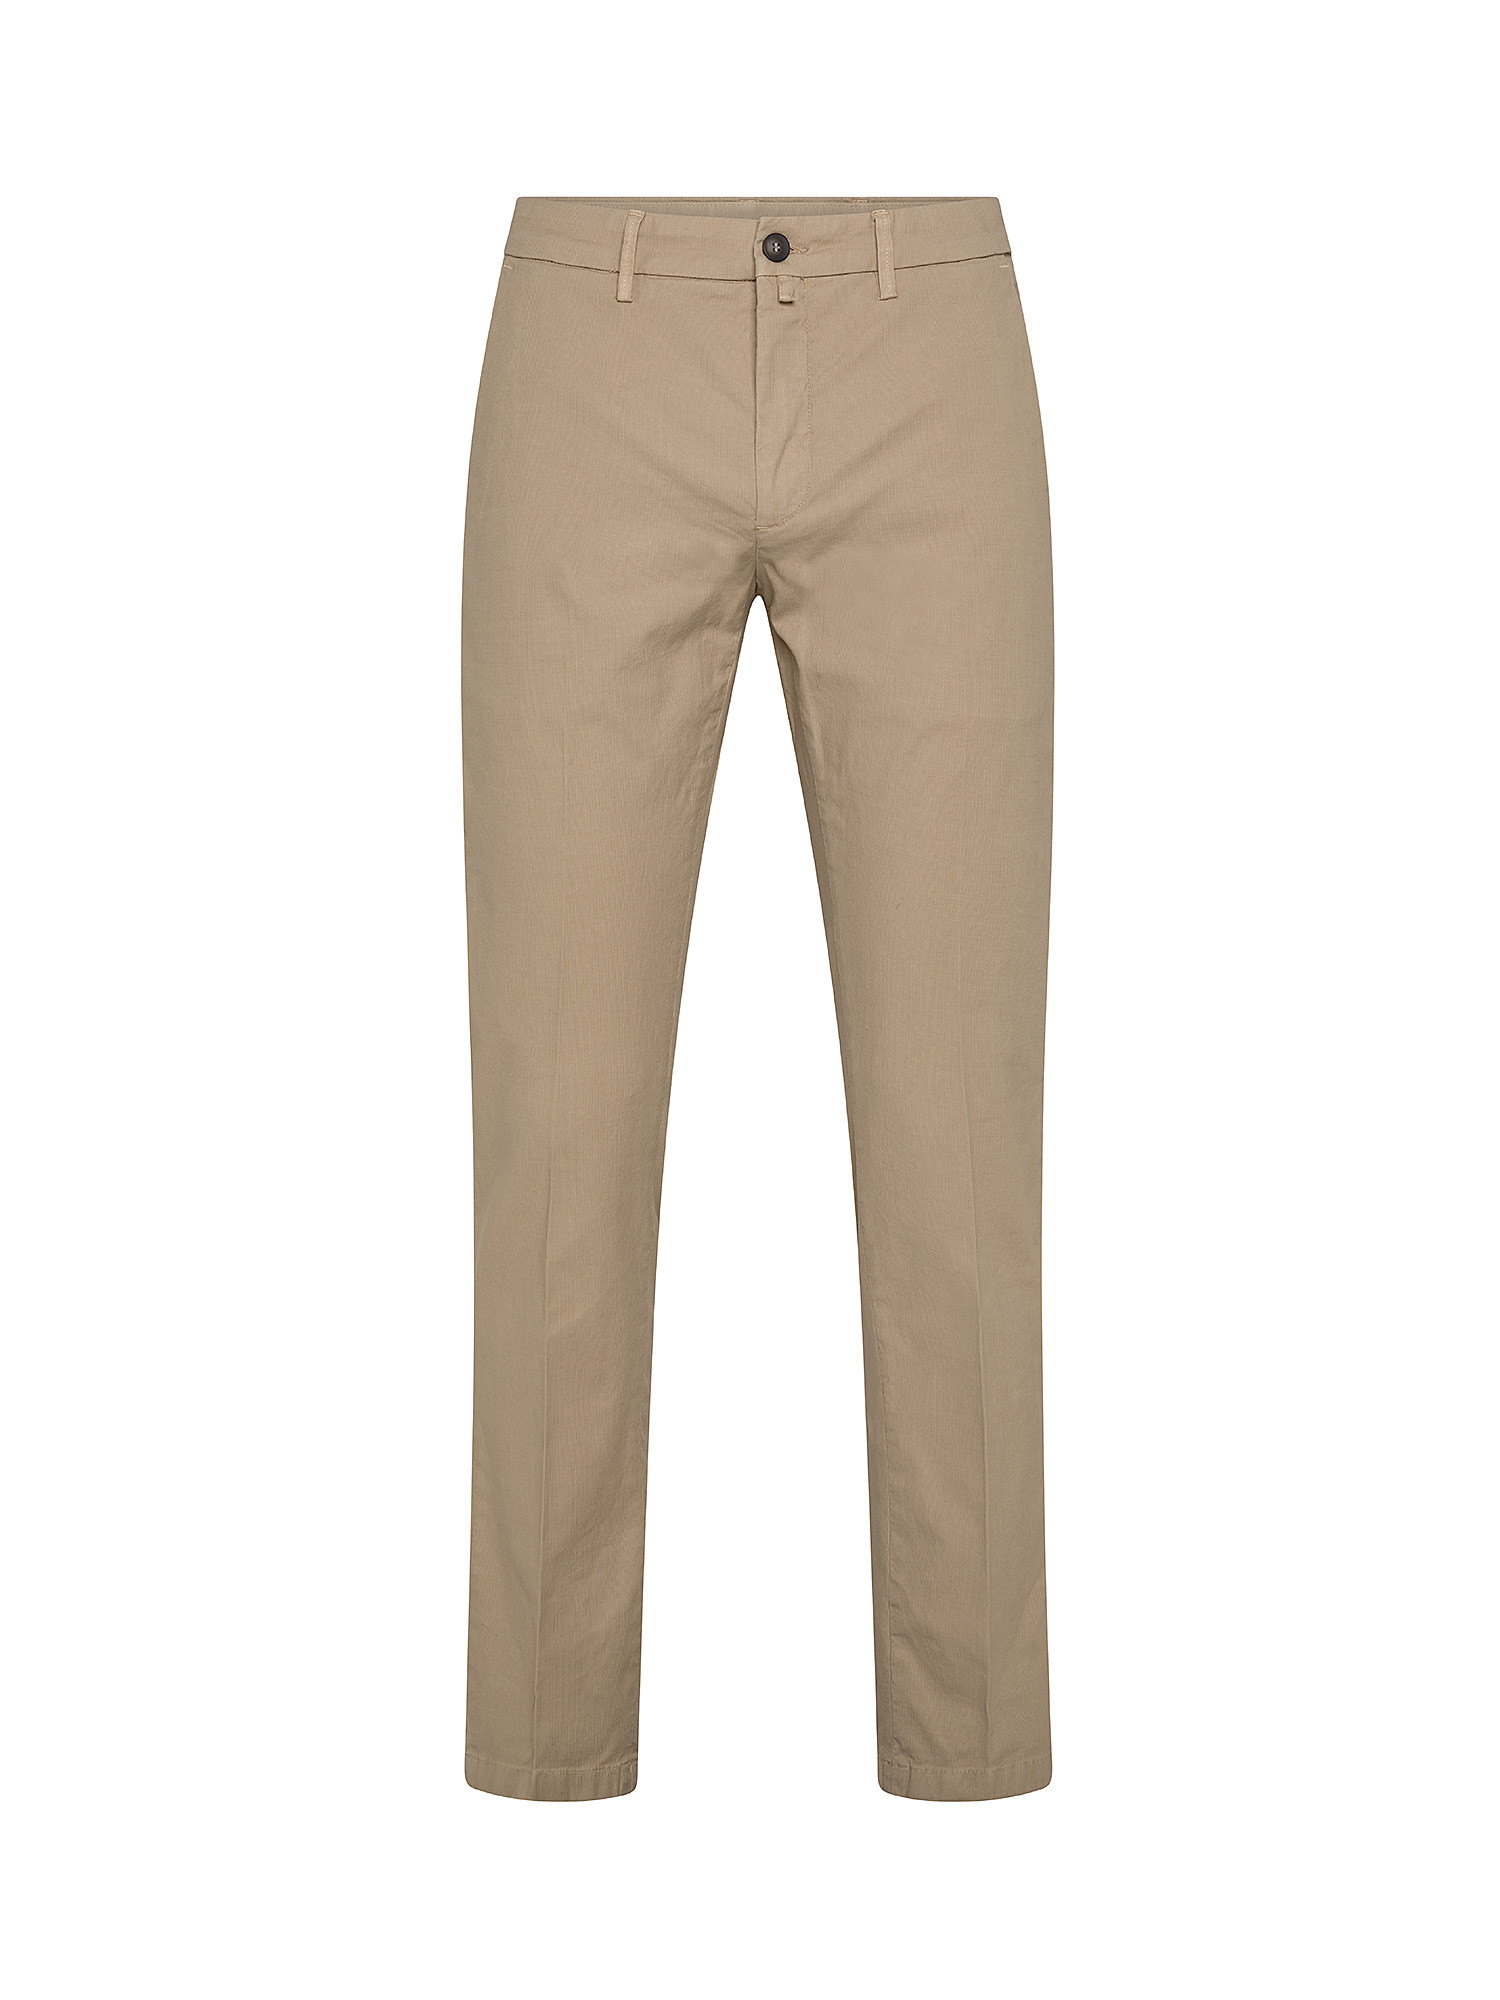 Chino trousers, Beige, large image number 0